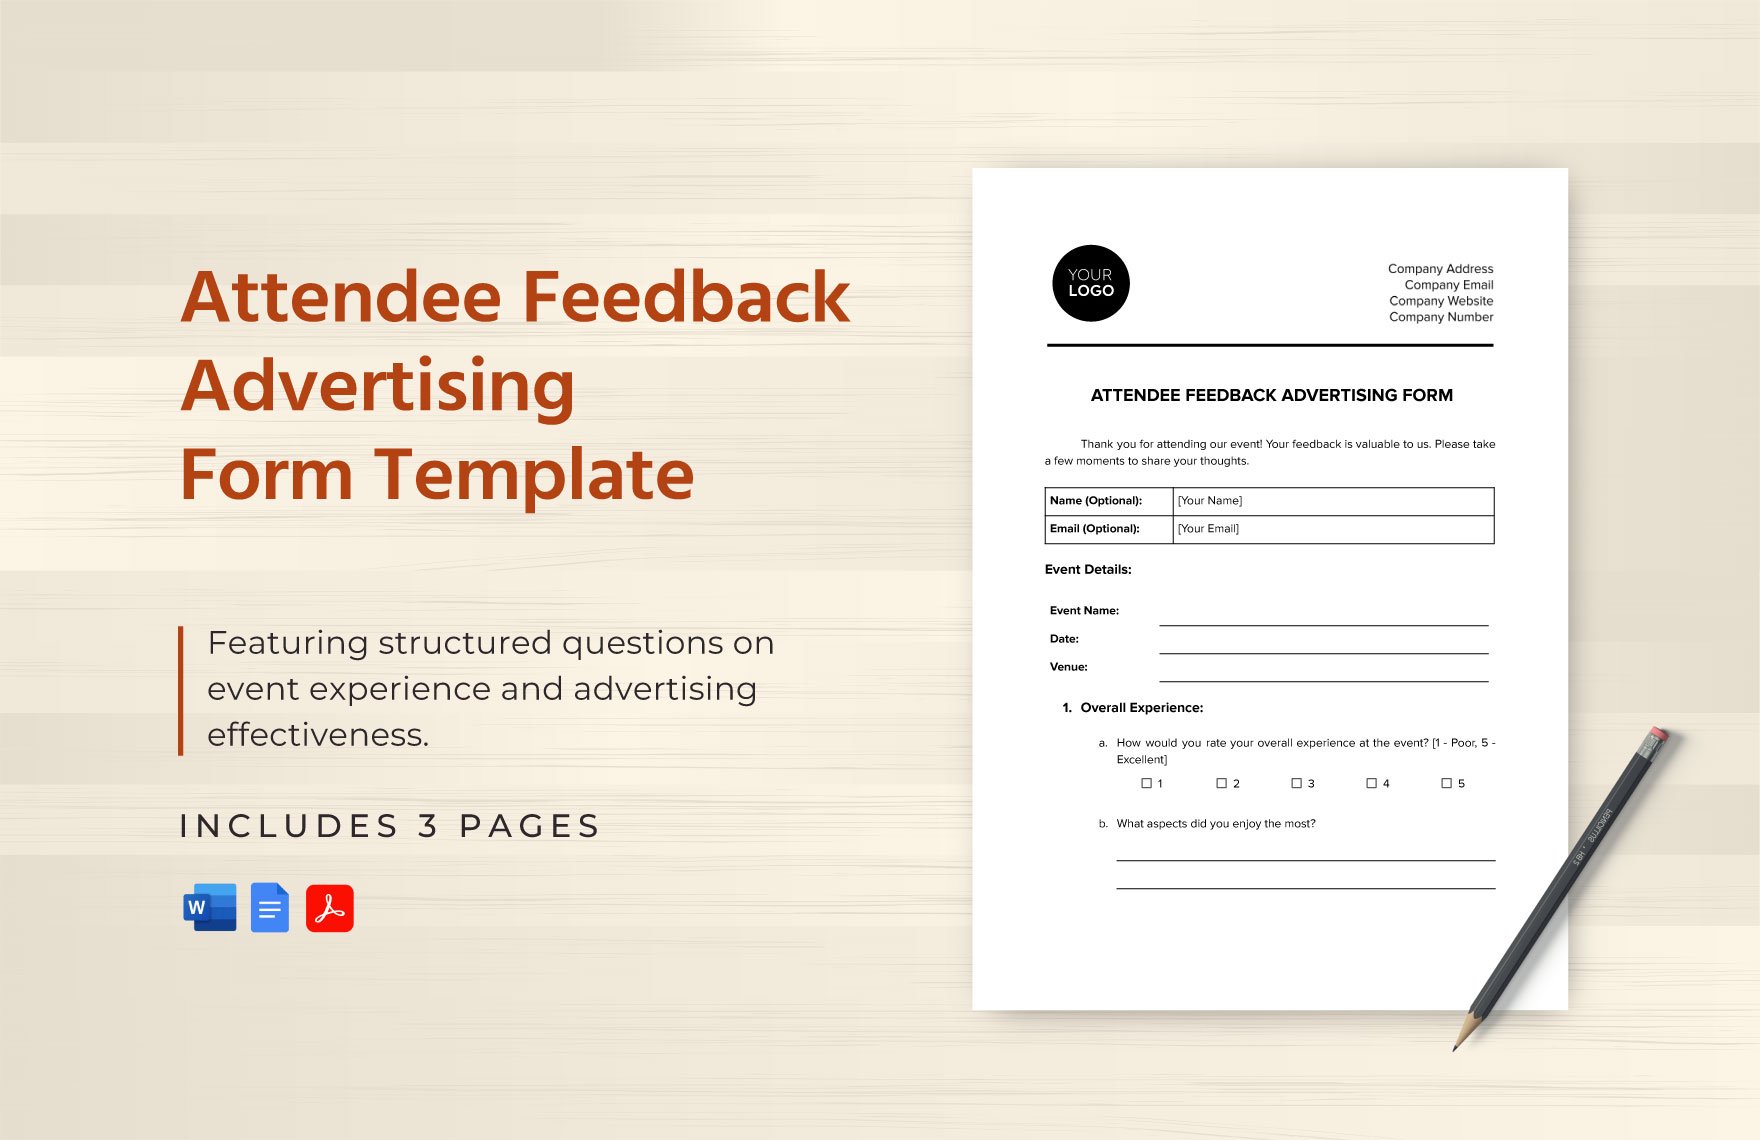 Attendee Feedback Advertising Form Template